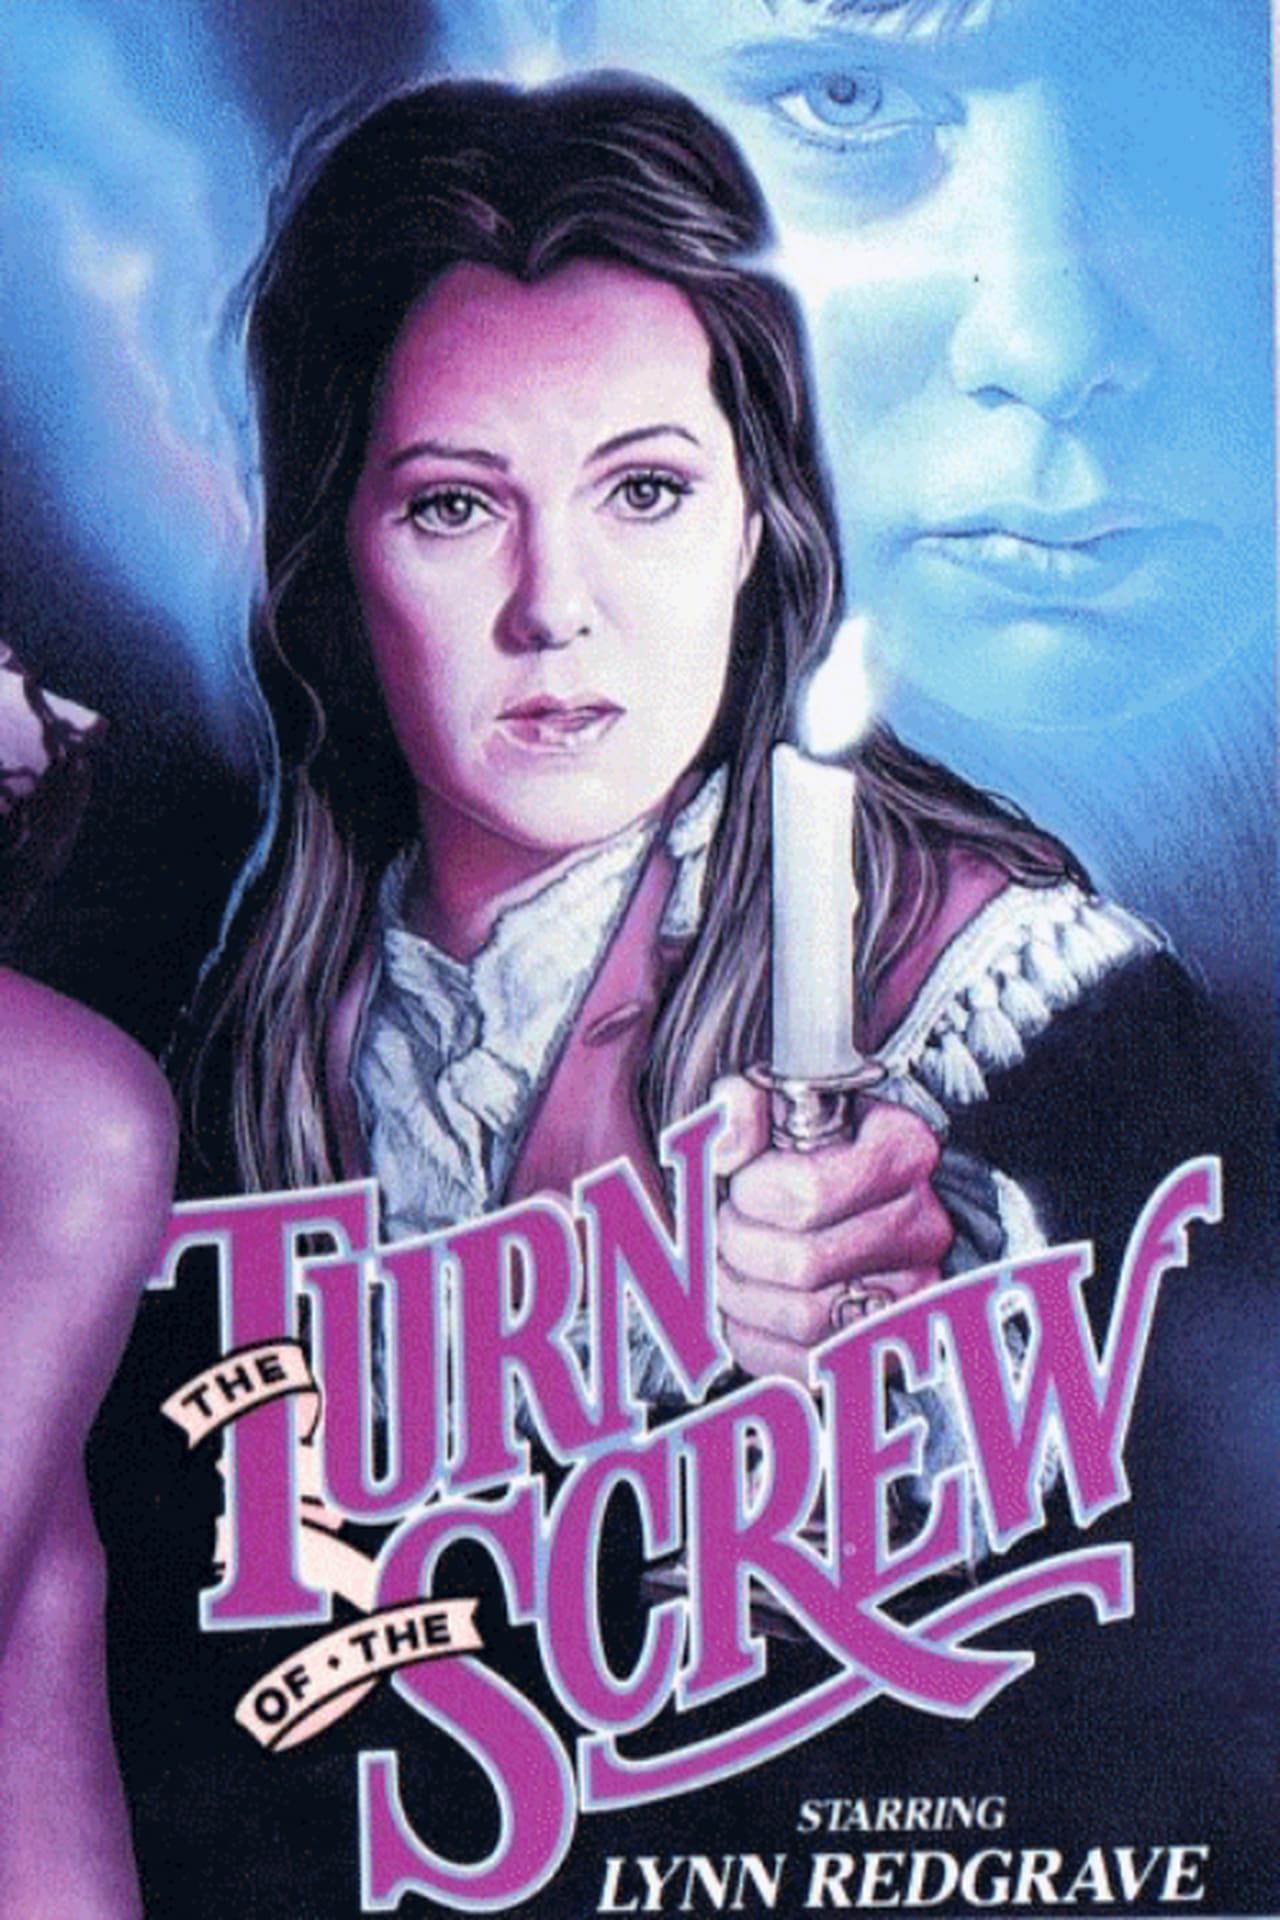 The Turn of the Screw poster